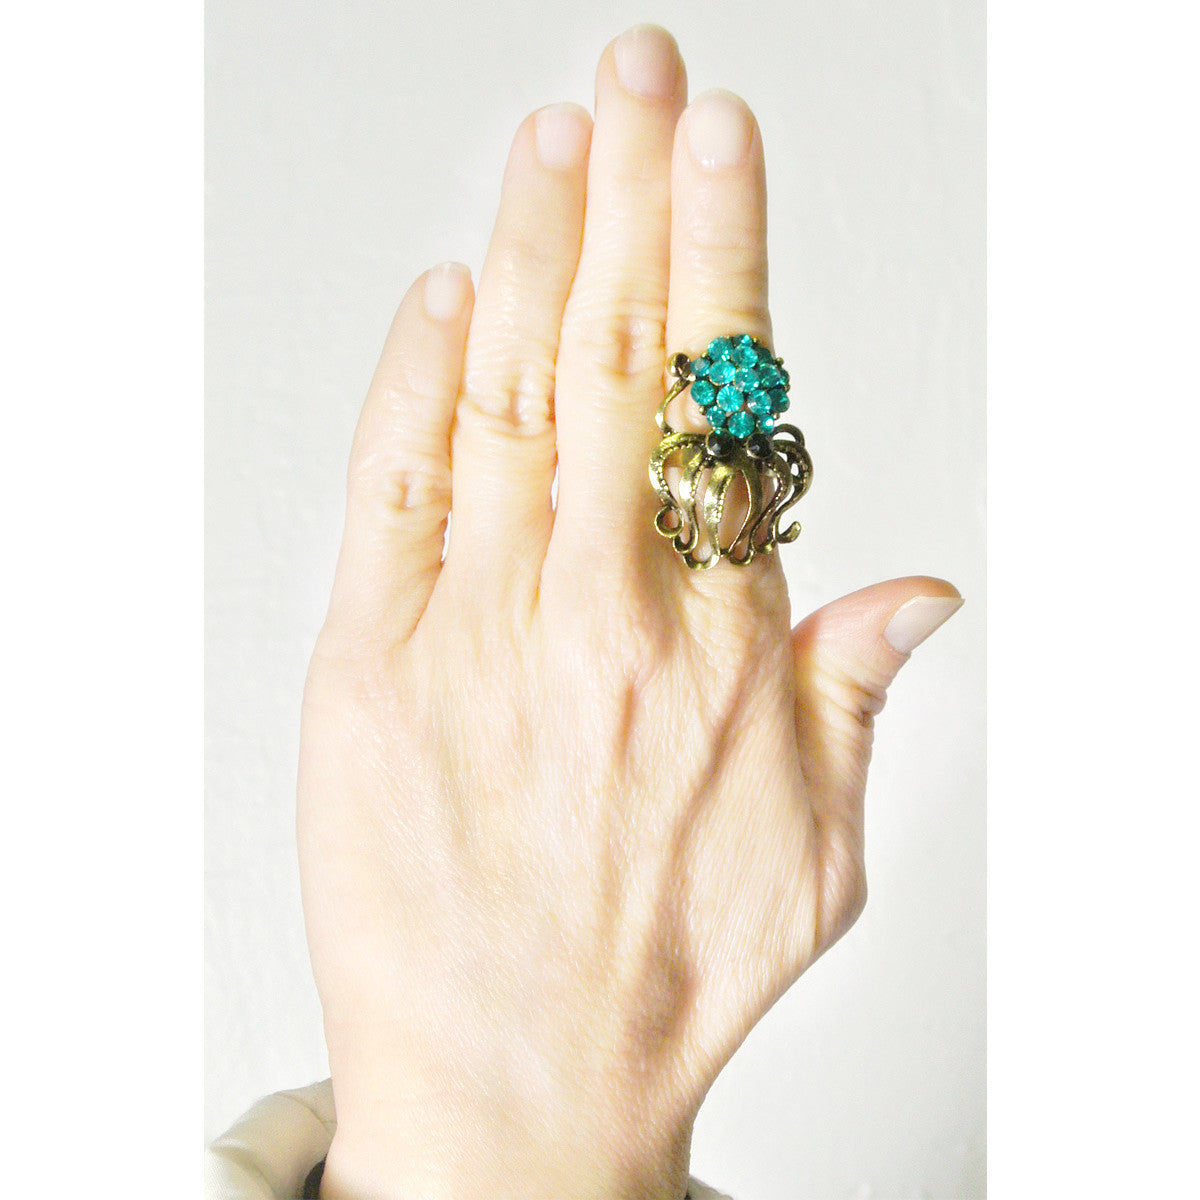 Wrapables Vintage Crystal Octopus Adjustable Ring